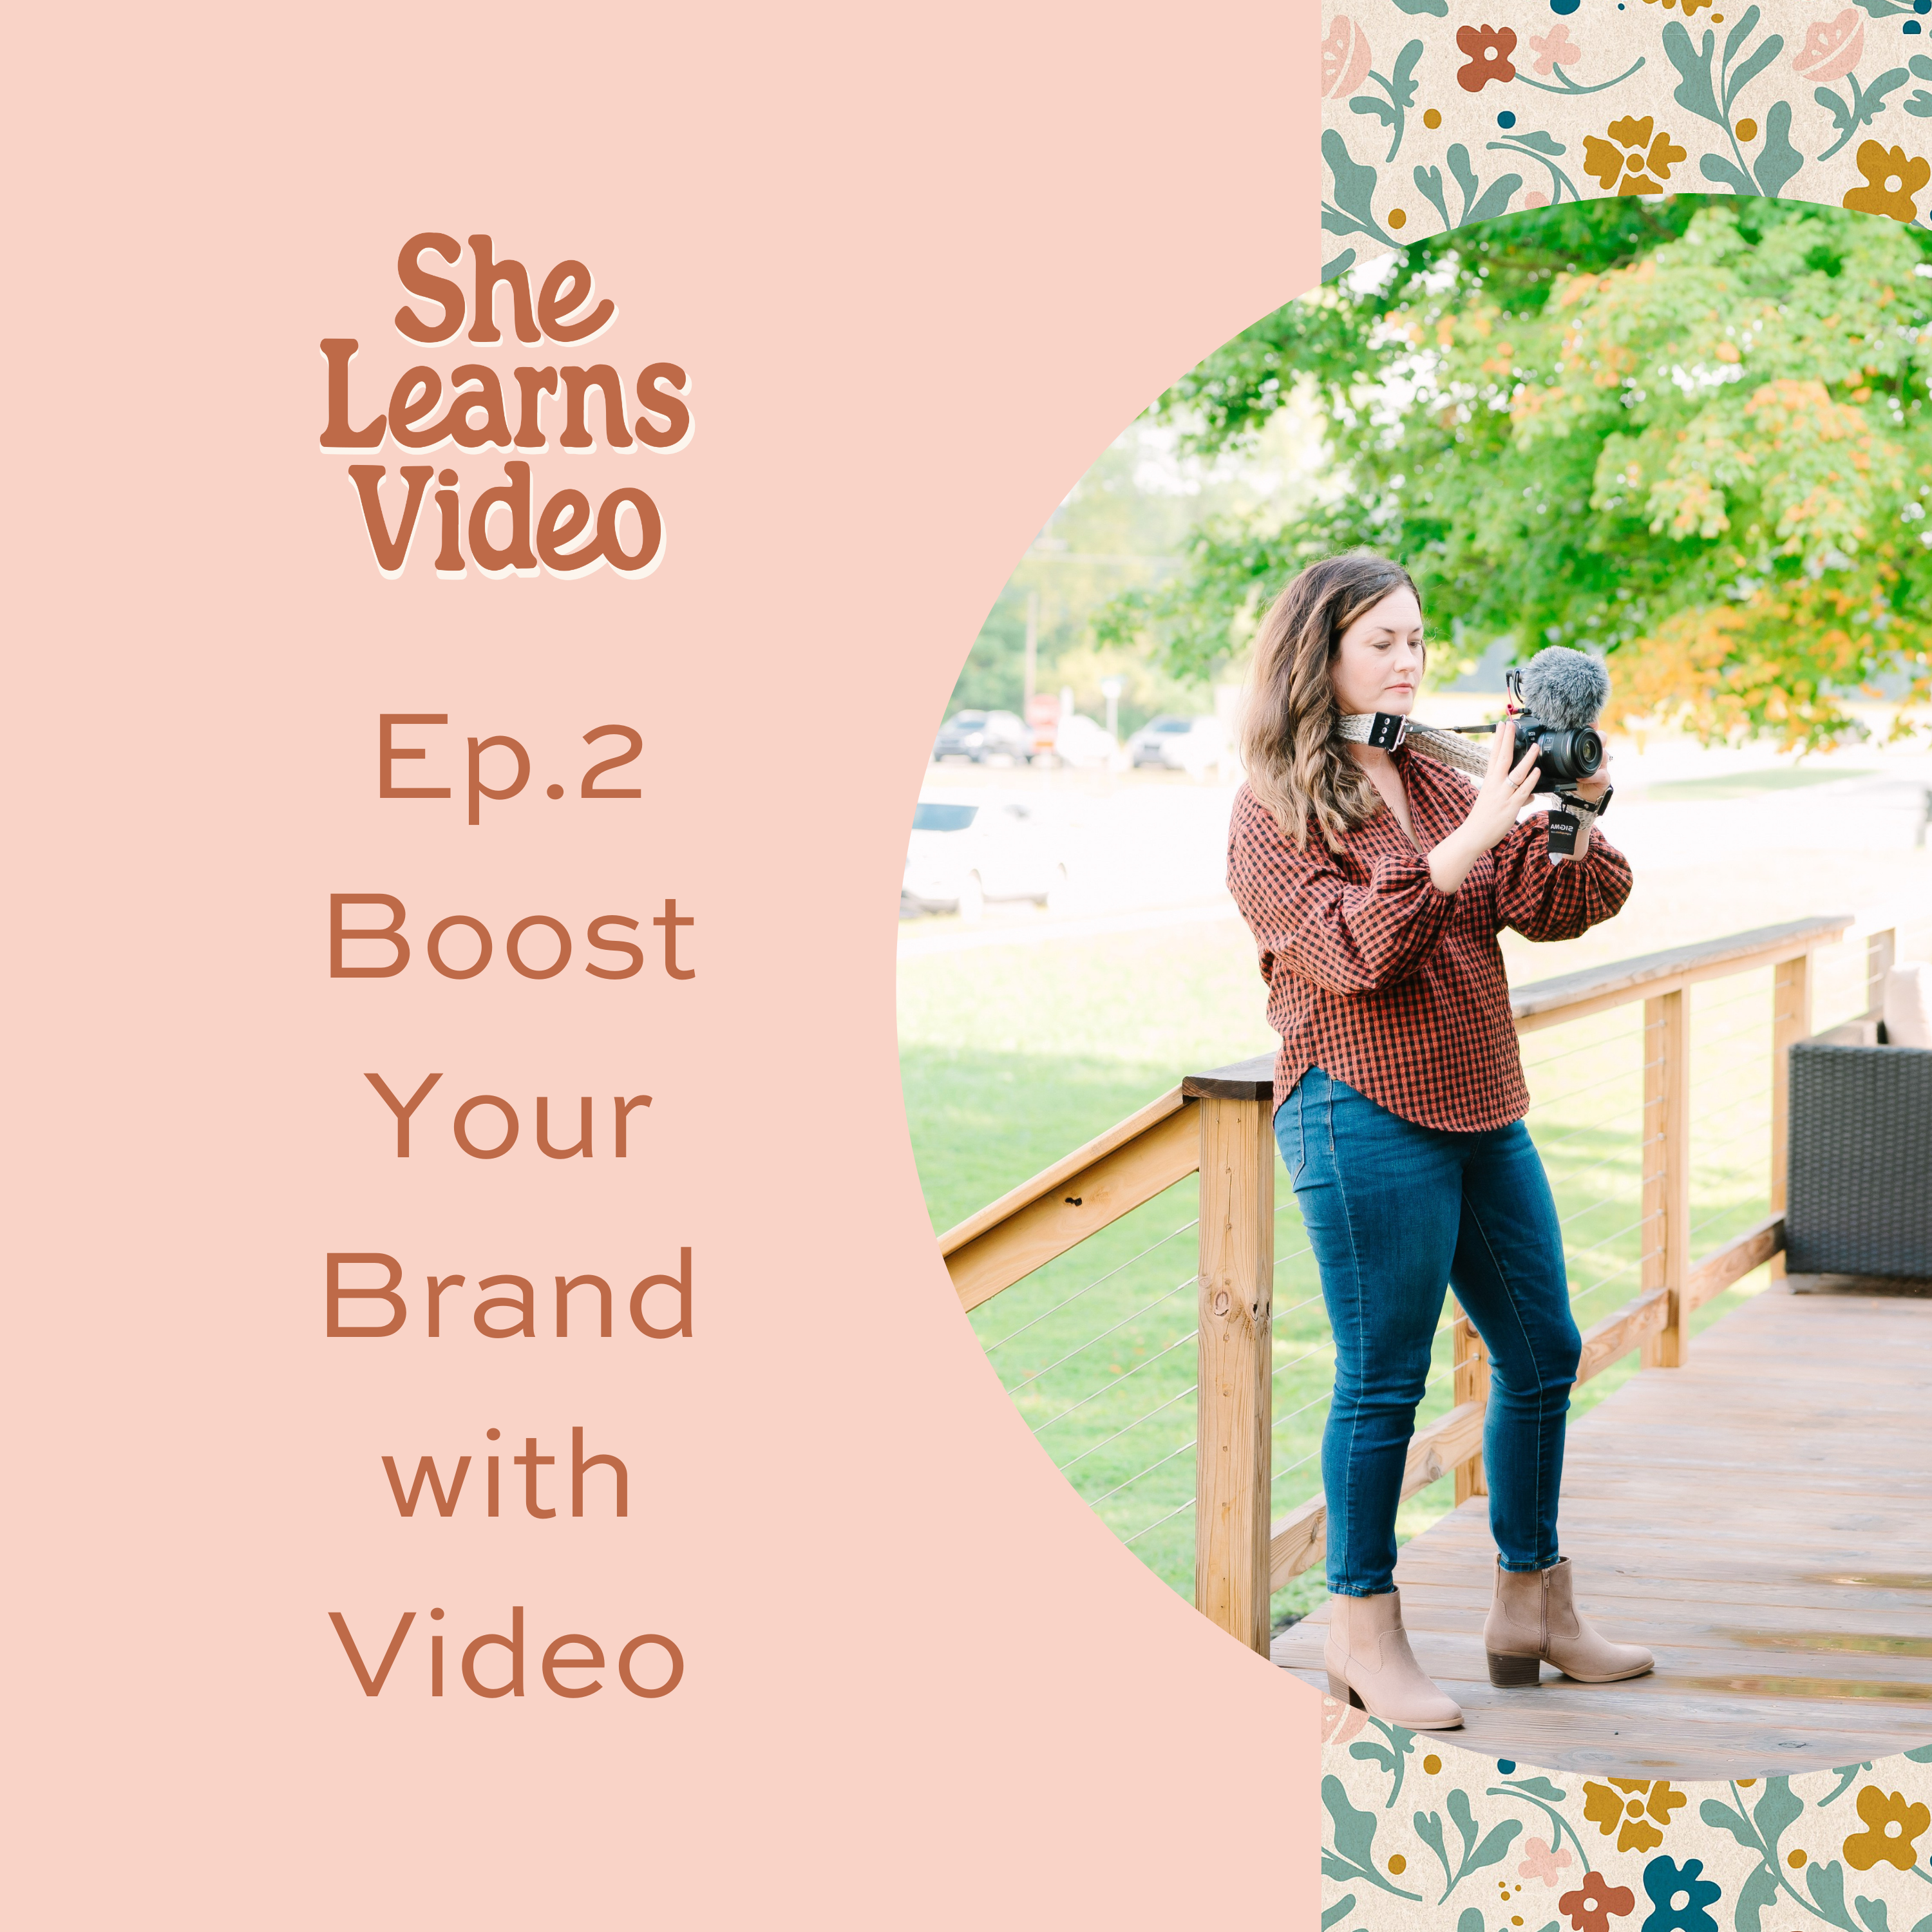 Boost Your Brand with Video